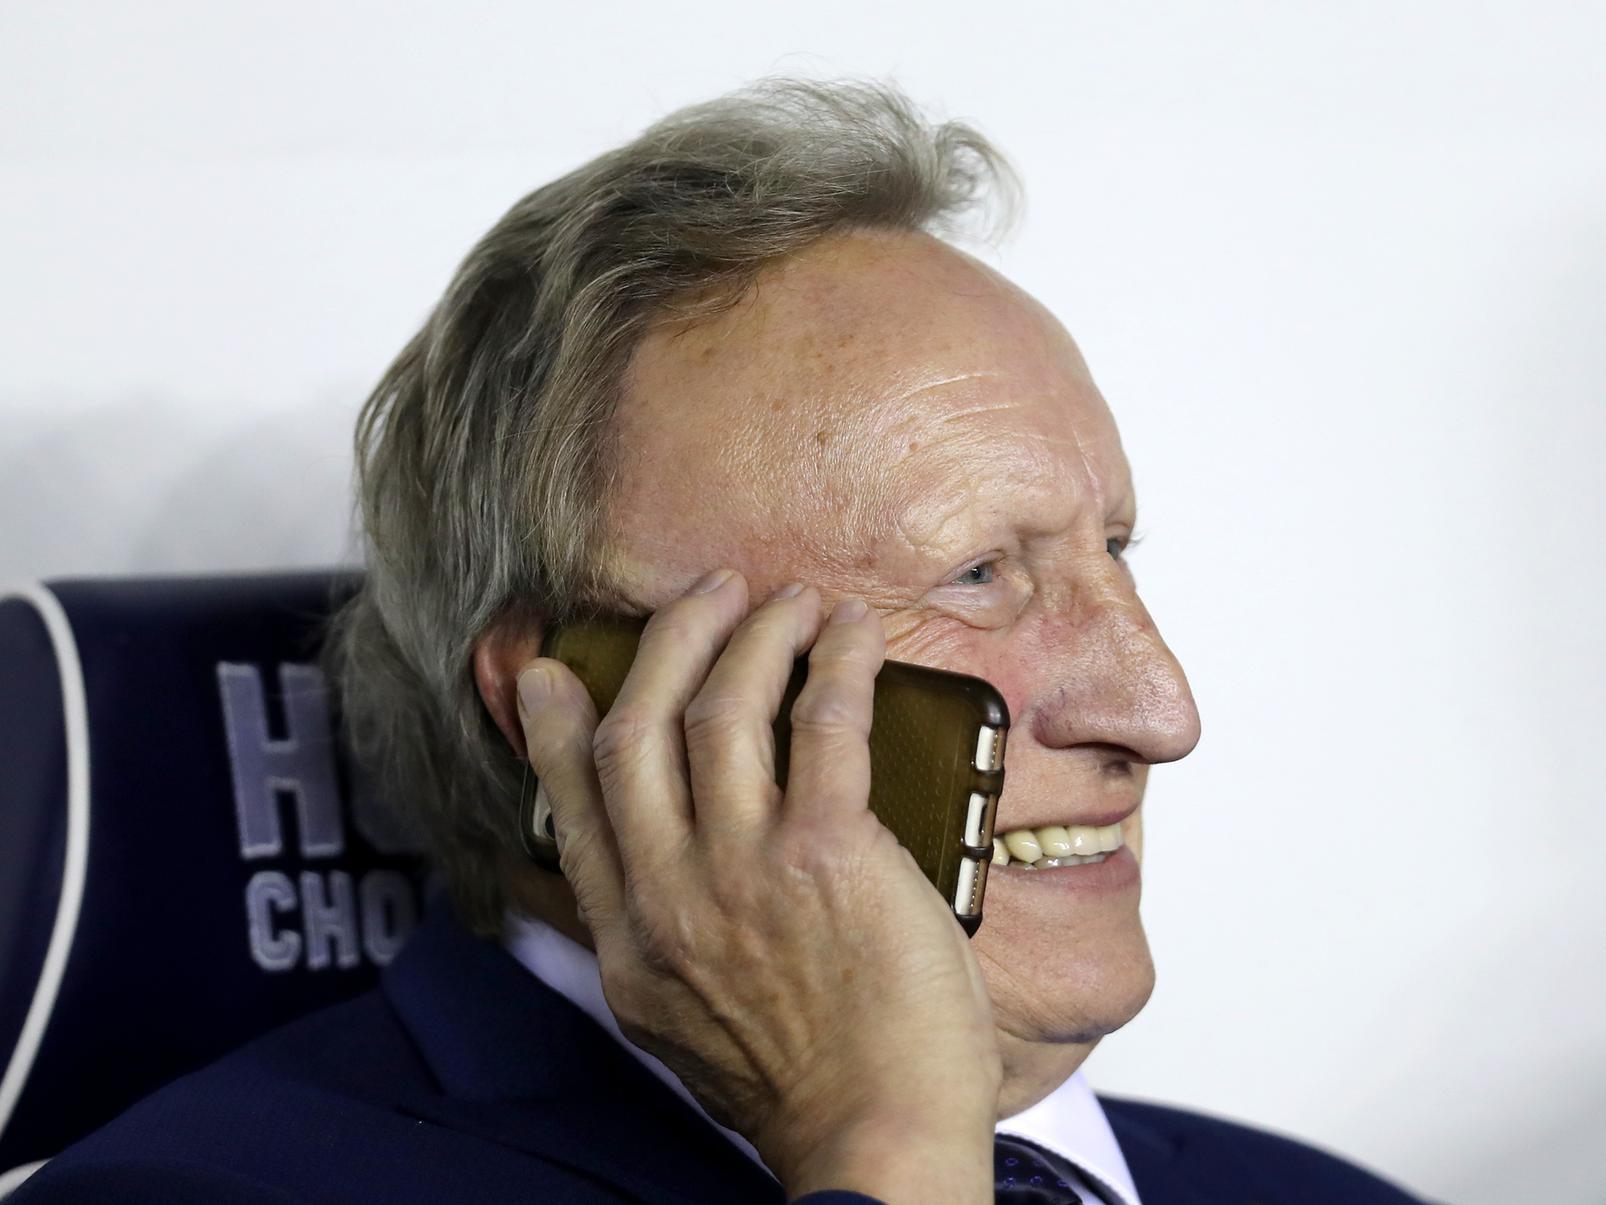 Ex-Sheffield United and Cardiff City boss Neil Warnock is said to have been lined up as the next Middlesbrough manager, should they lose patience and sack struggling Jonathan Woodgate. (Wales Online)